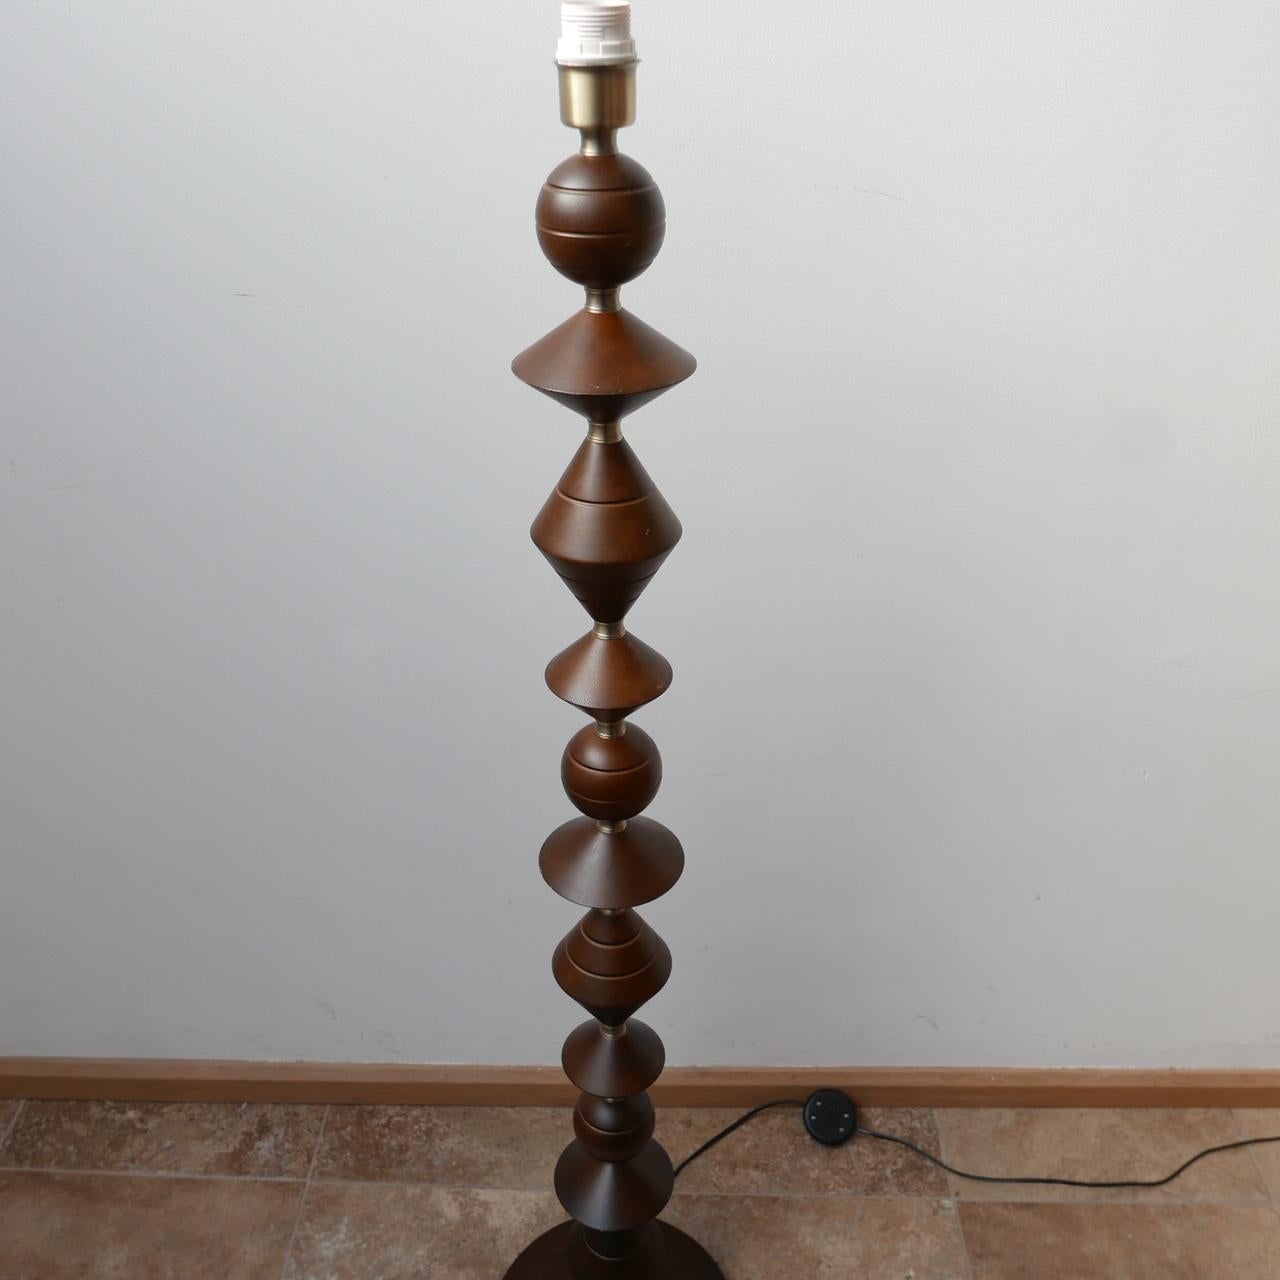 An English floor lamp. 

Geometric stacked shapes. 

Re-wired and PAT tested. 

Generally good condition, one segment has a hairline split. 

Dimensions: 134 height x 28 diameter in cm. 

Delivery: POA.

 